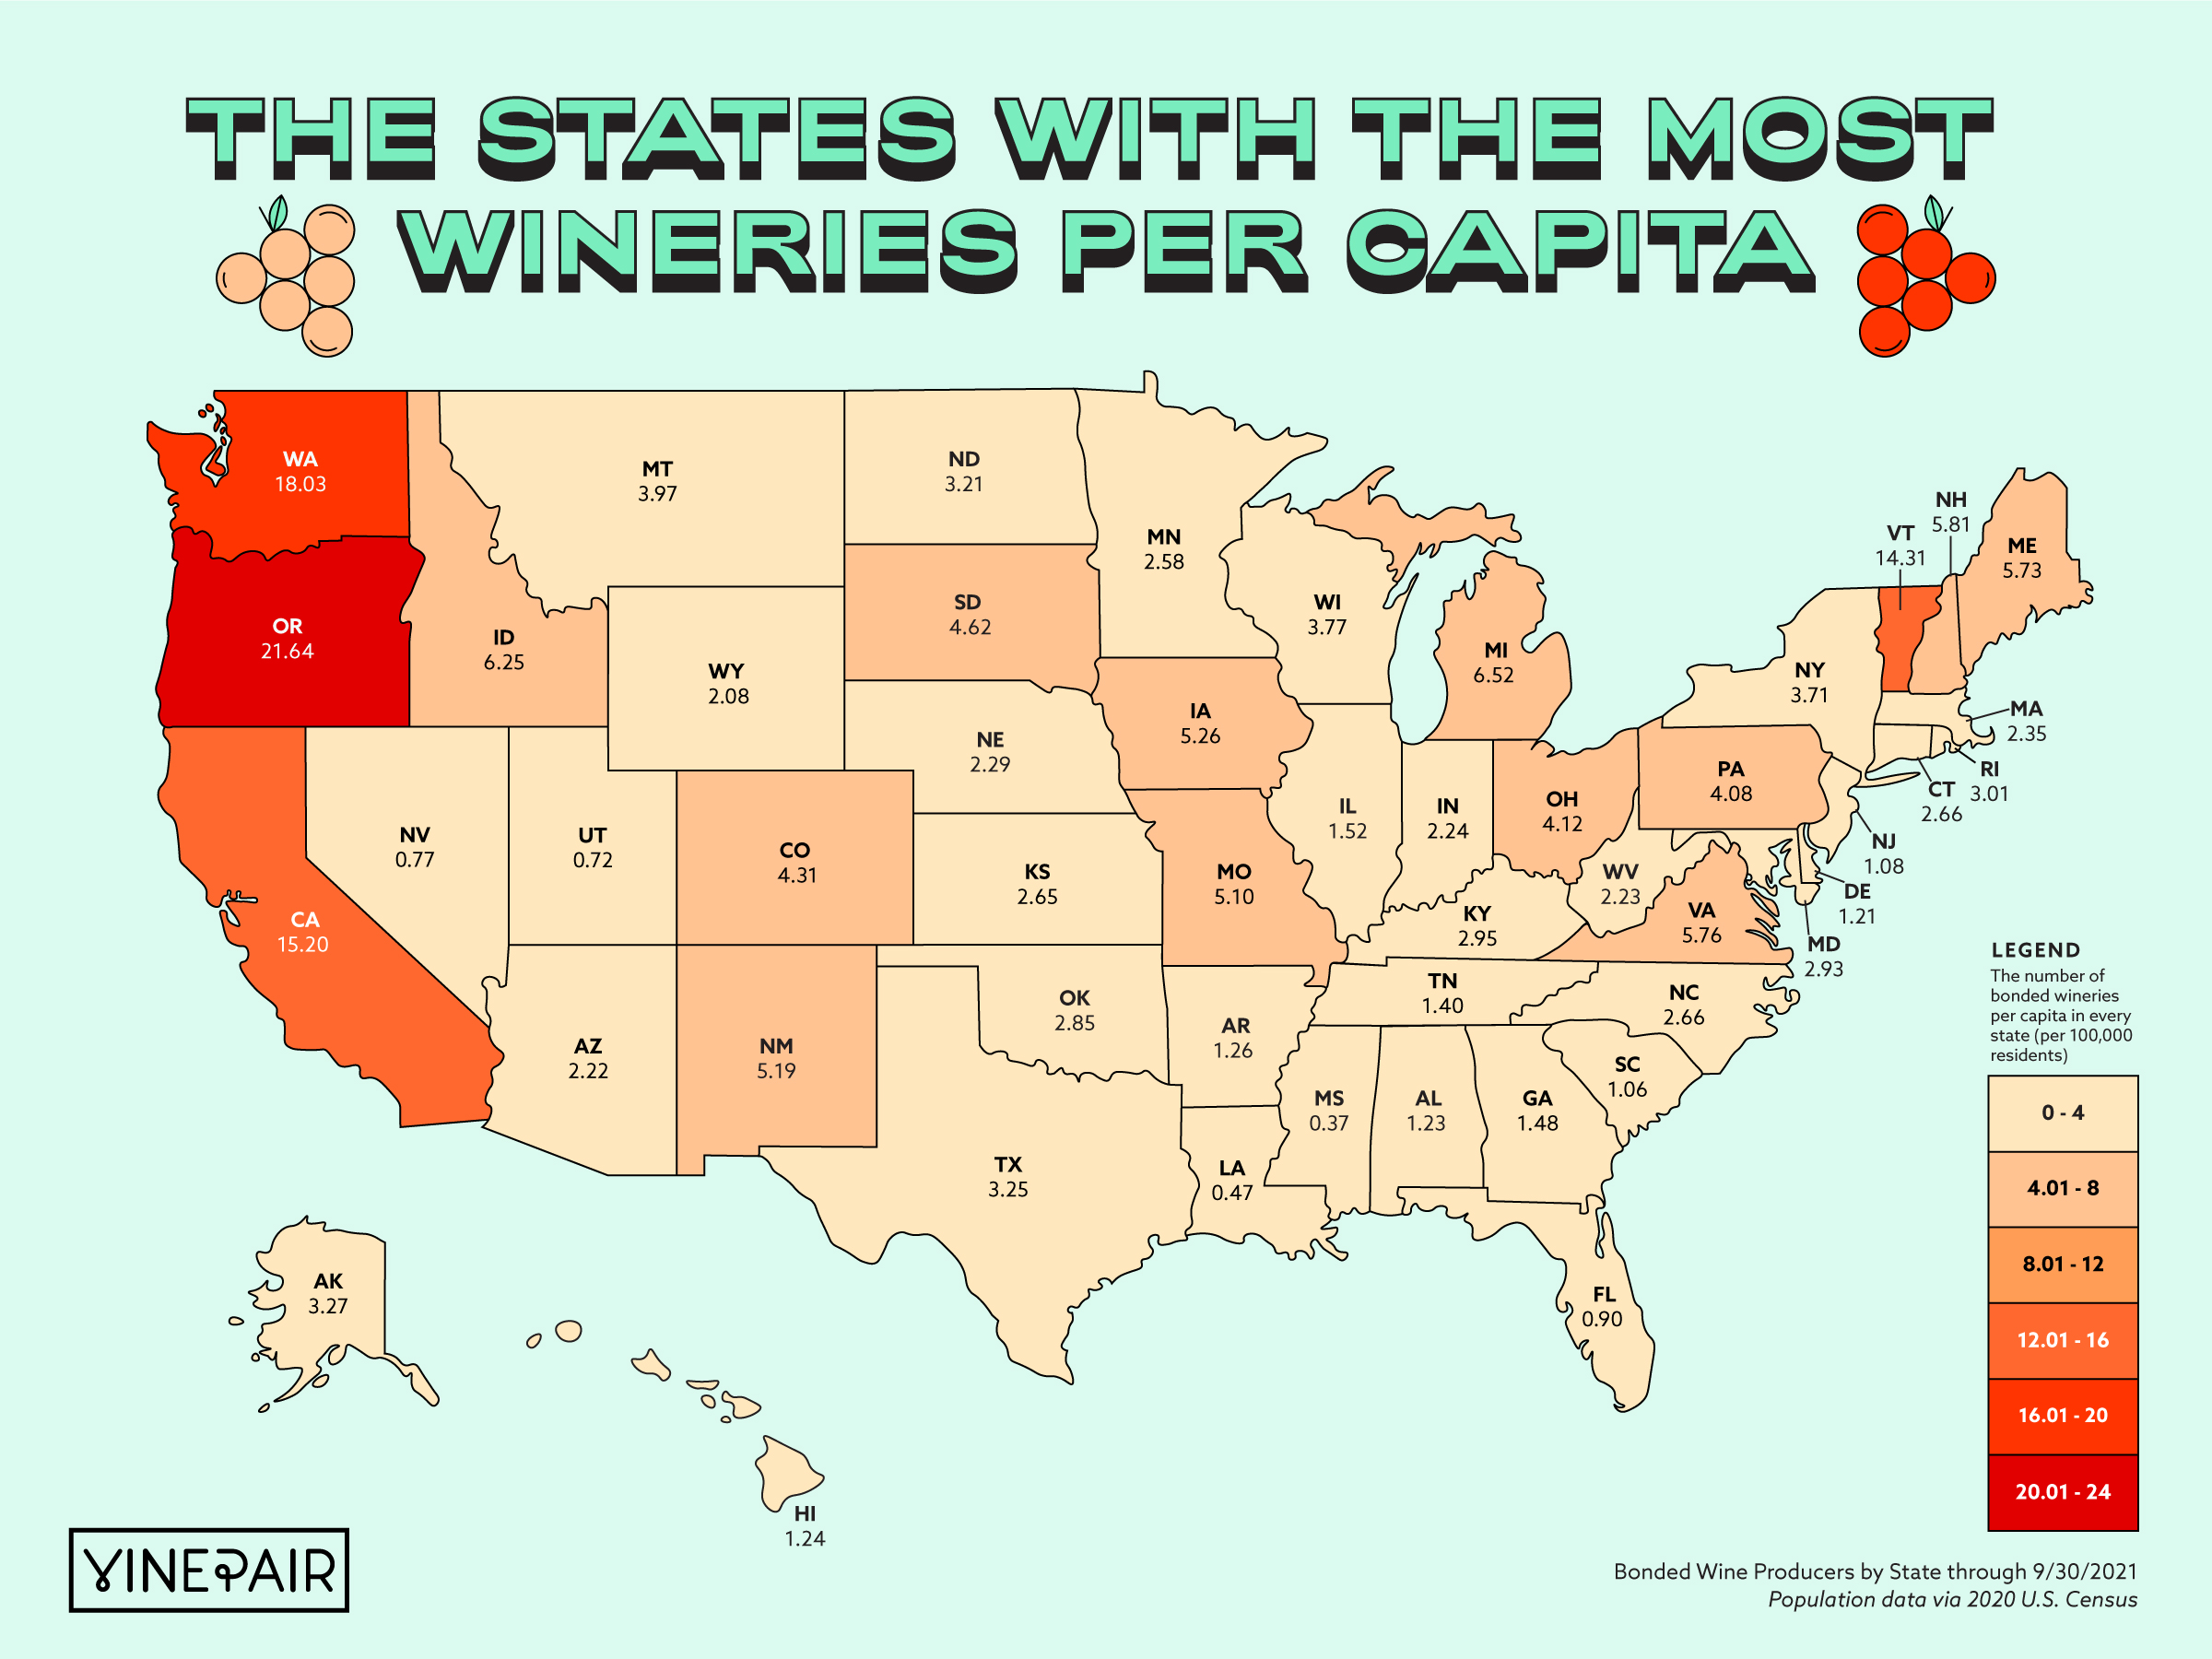 These are the states with the most wineries per capita